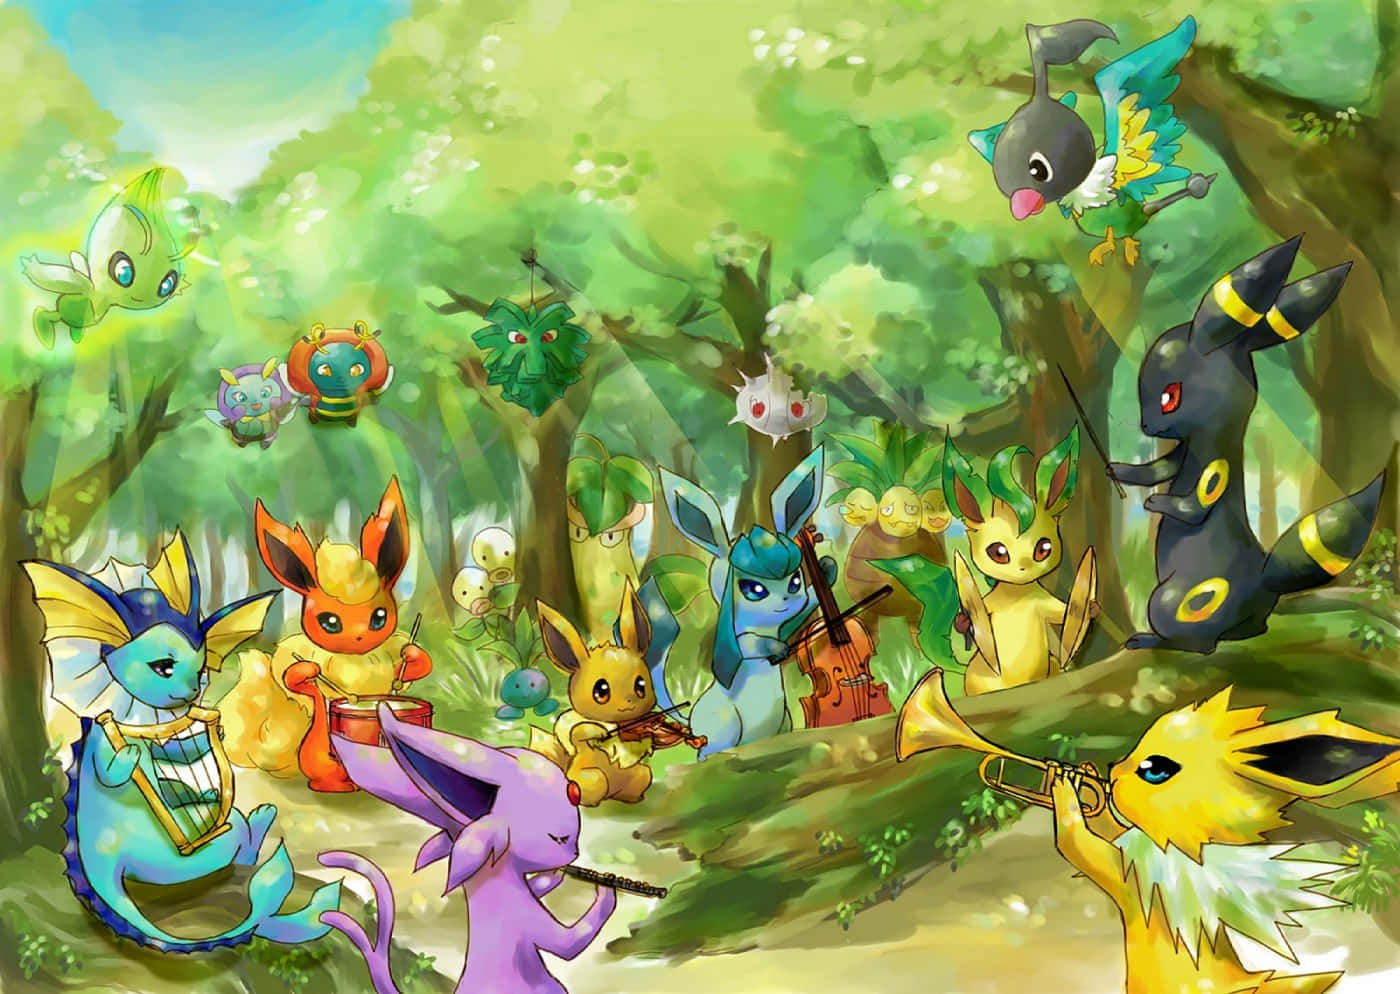 Chatot With Eevee's Evolutions In Forest Wallpaper